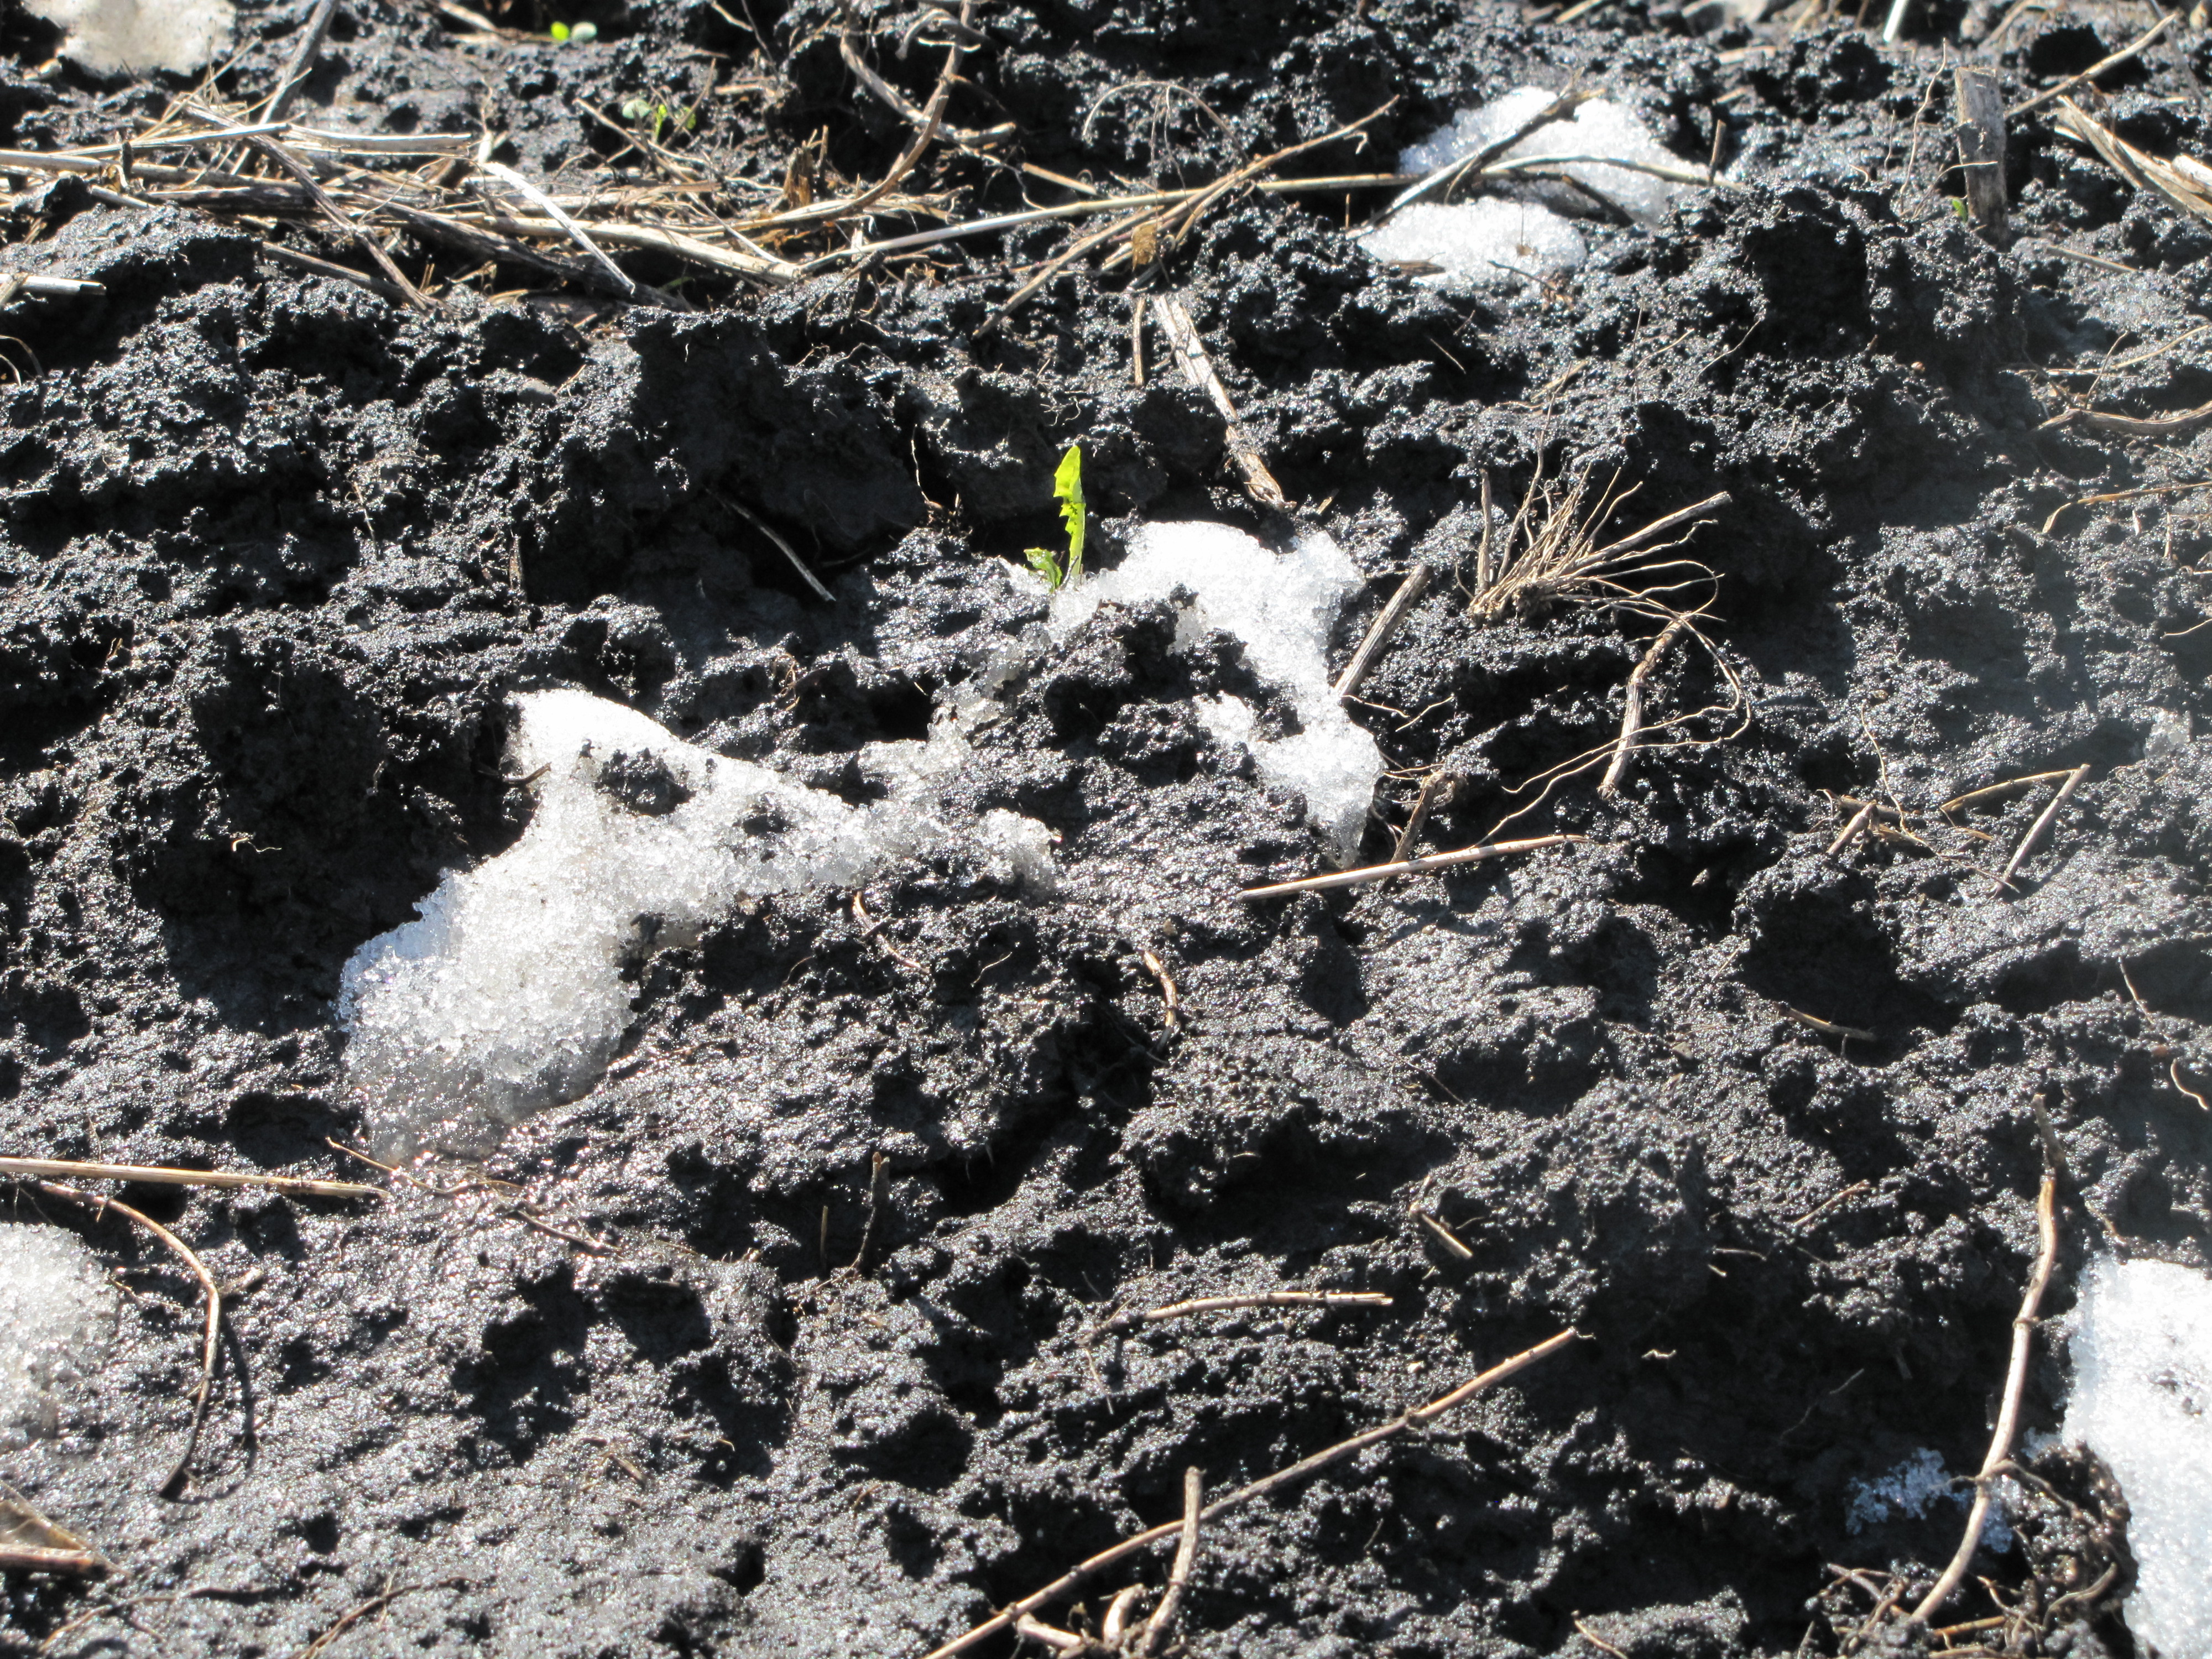 This agronomic image shows bad weather in soil